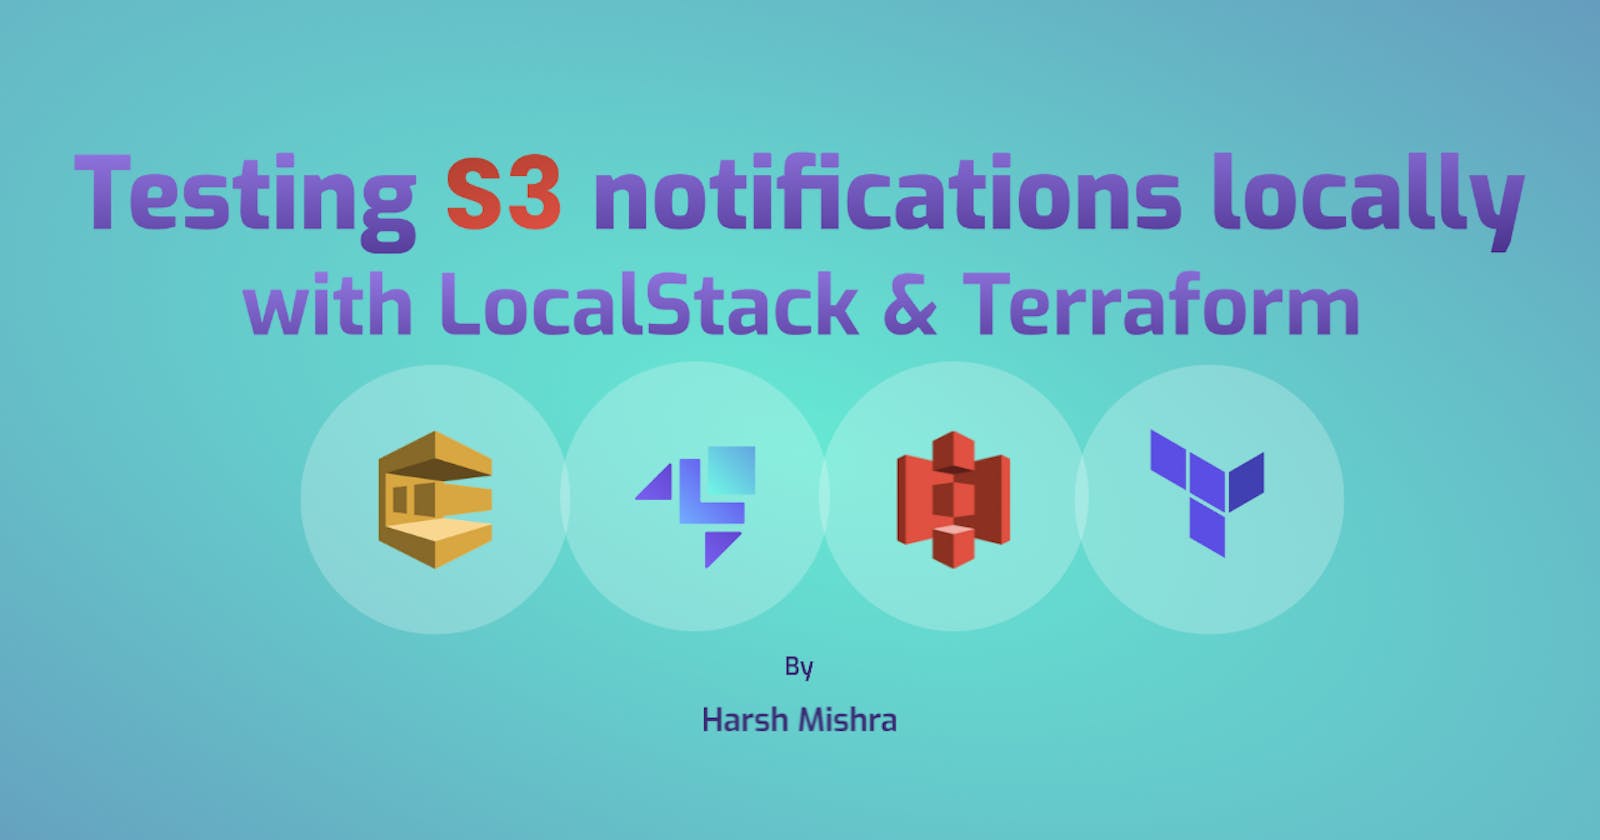 Testing S3 notifications locally with LocalStack & Terraform